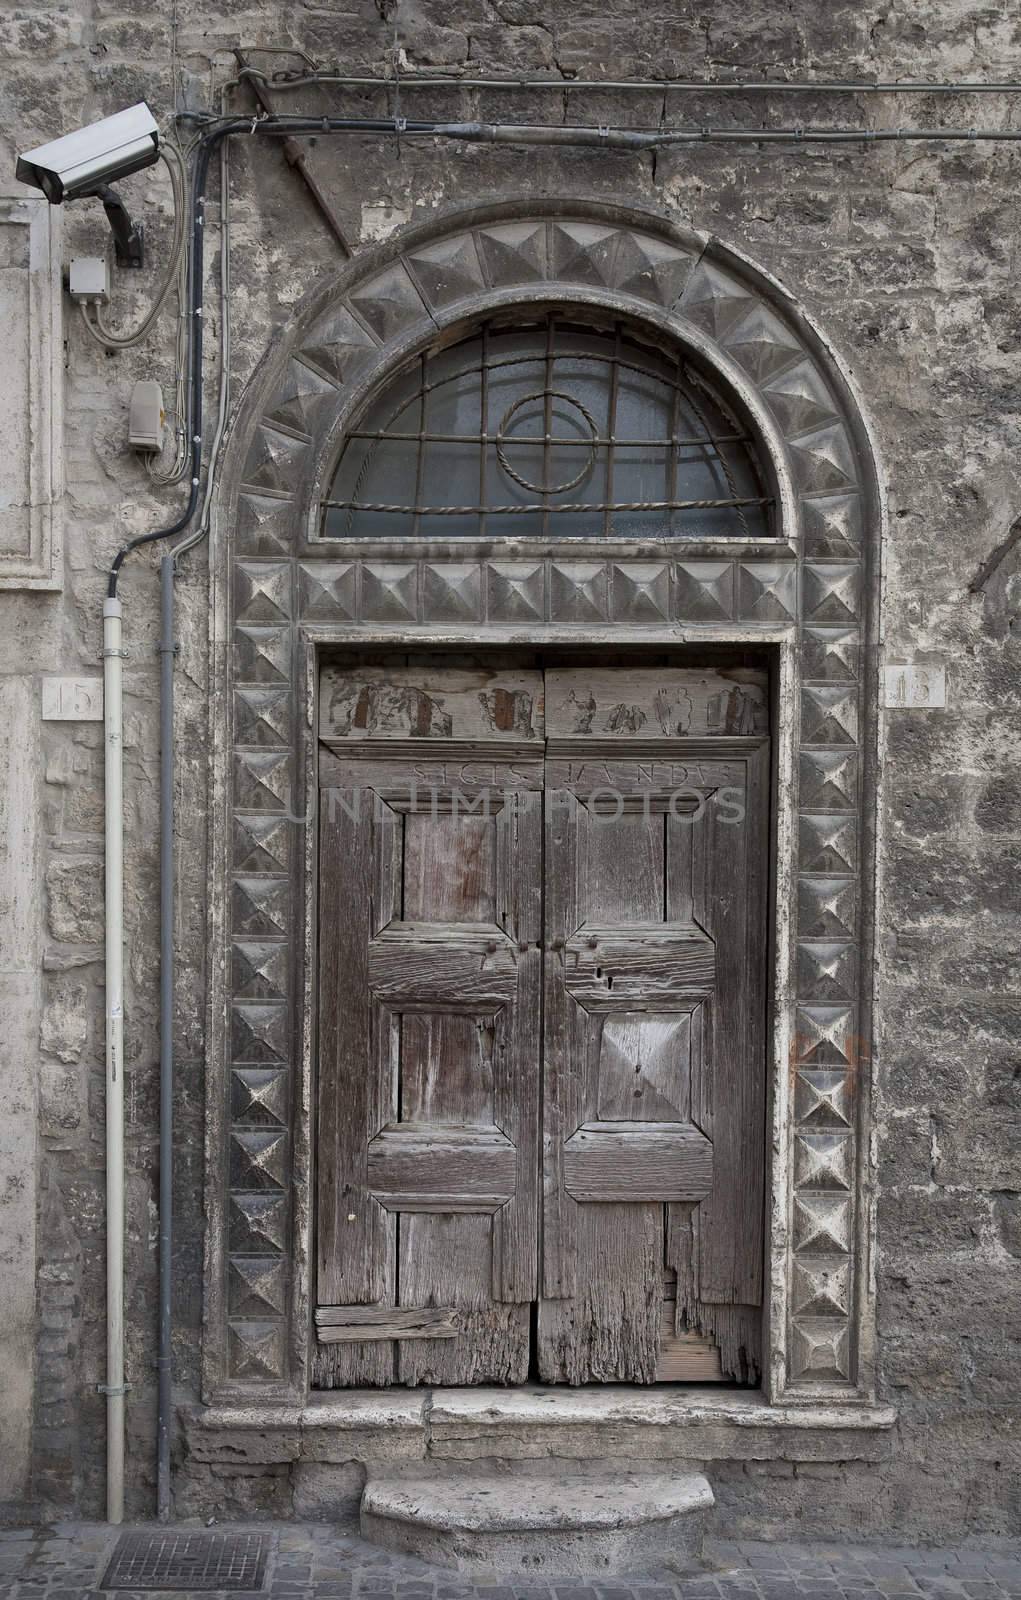 Beautiful old urban weathered entrance with surveillance camera Ascoli Piceno, Marche - Italy.